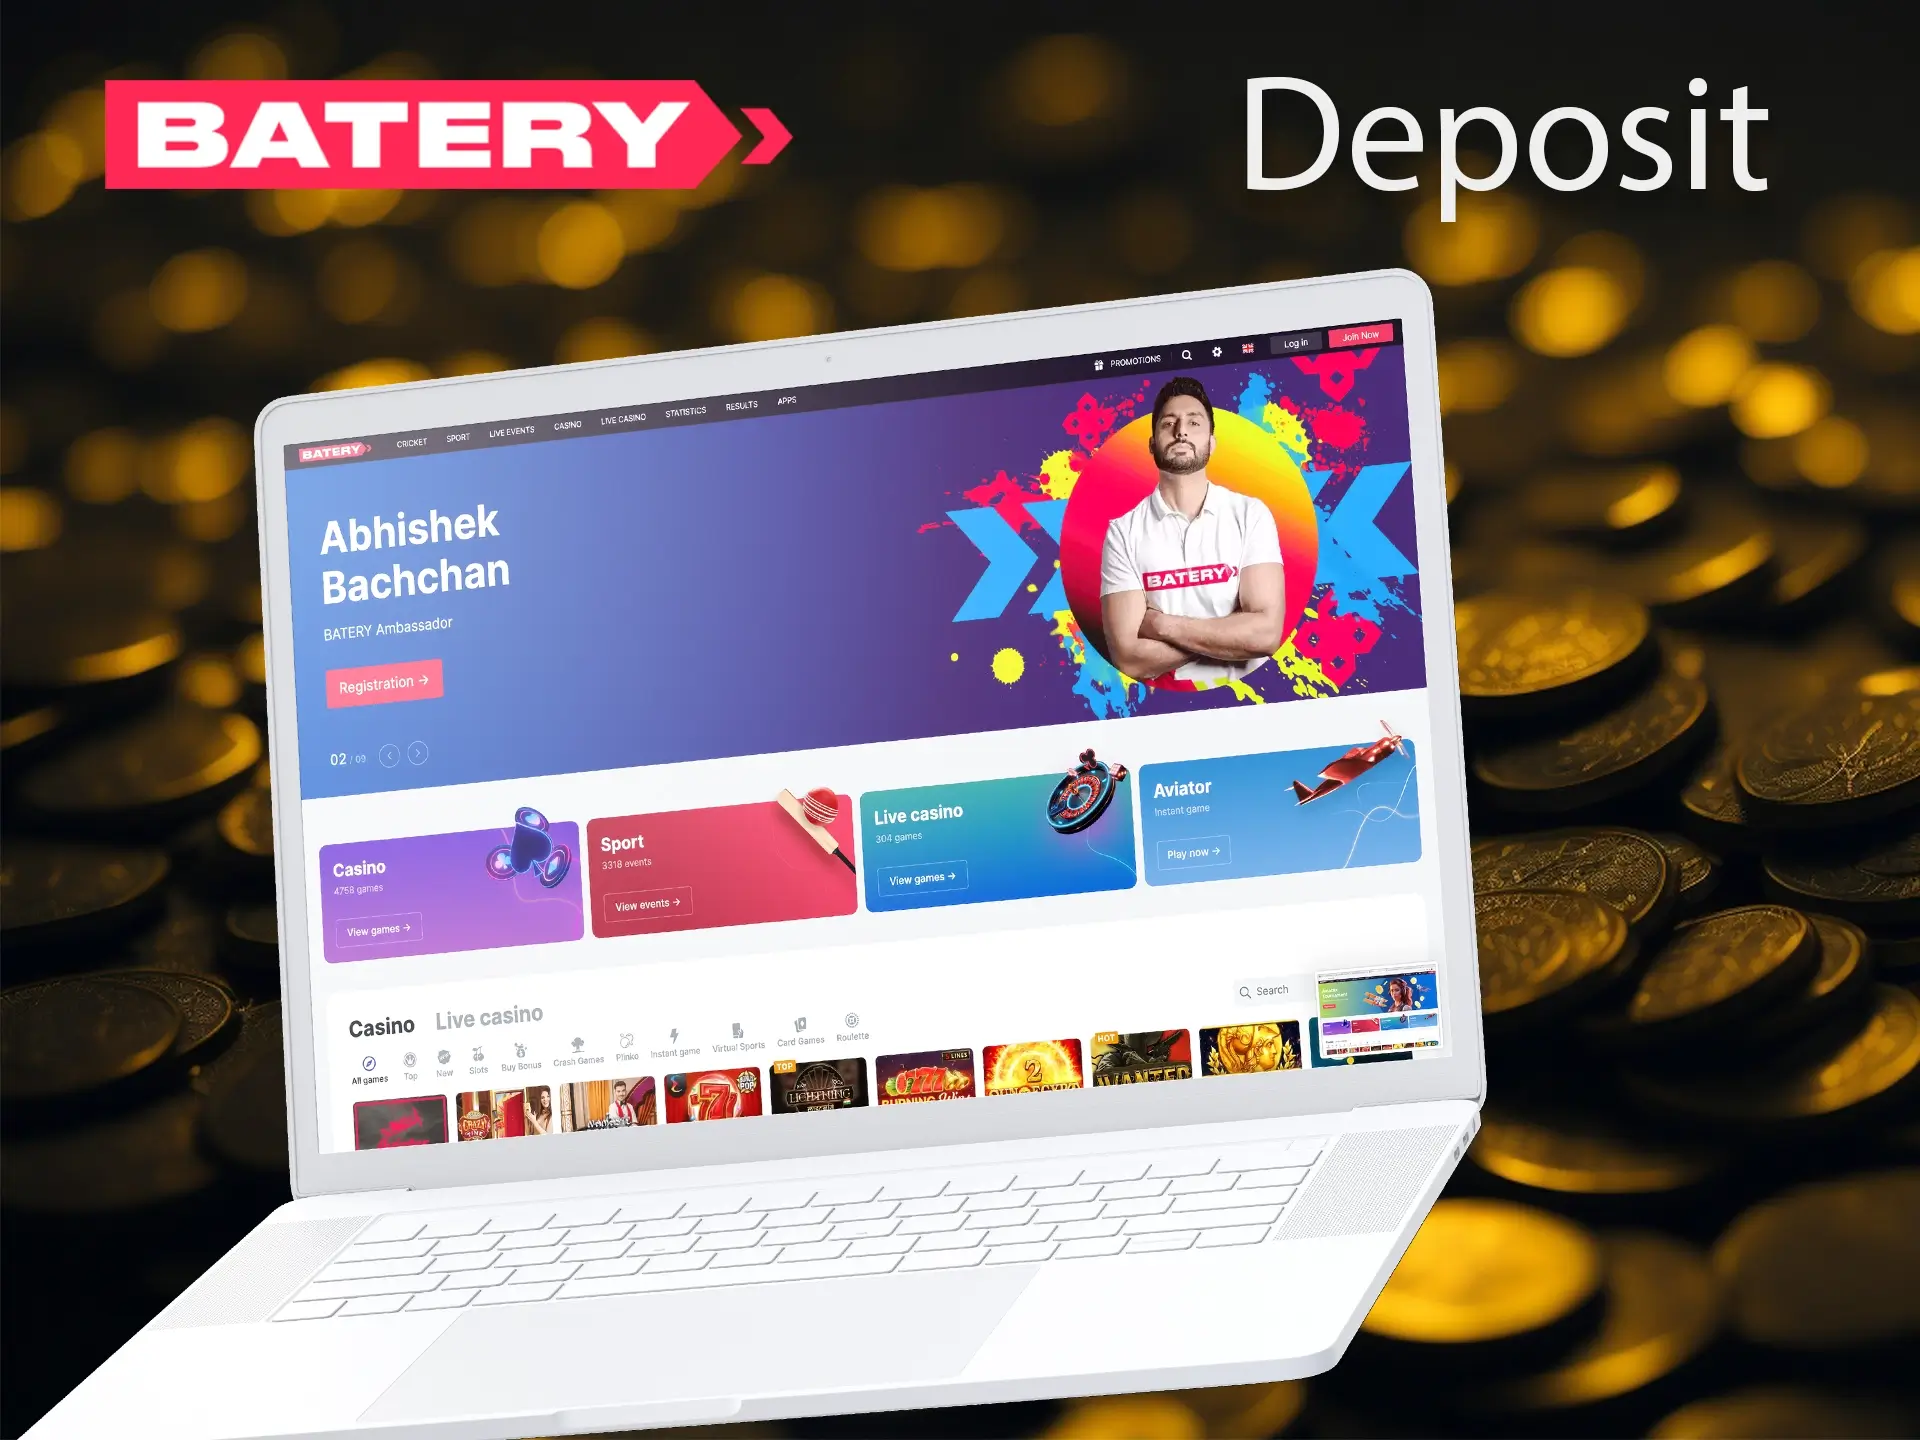 Deposit your funds in your personal Batery account in a way that is convenient for you.